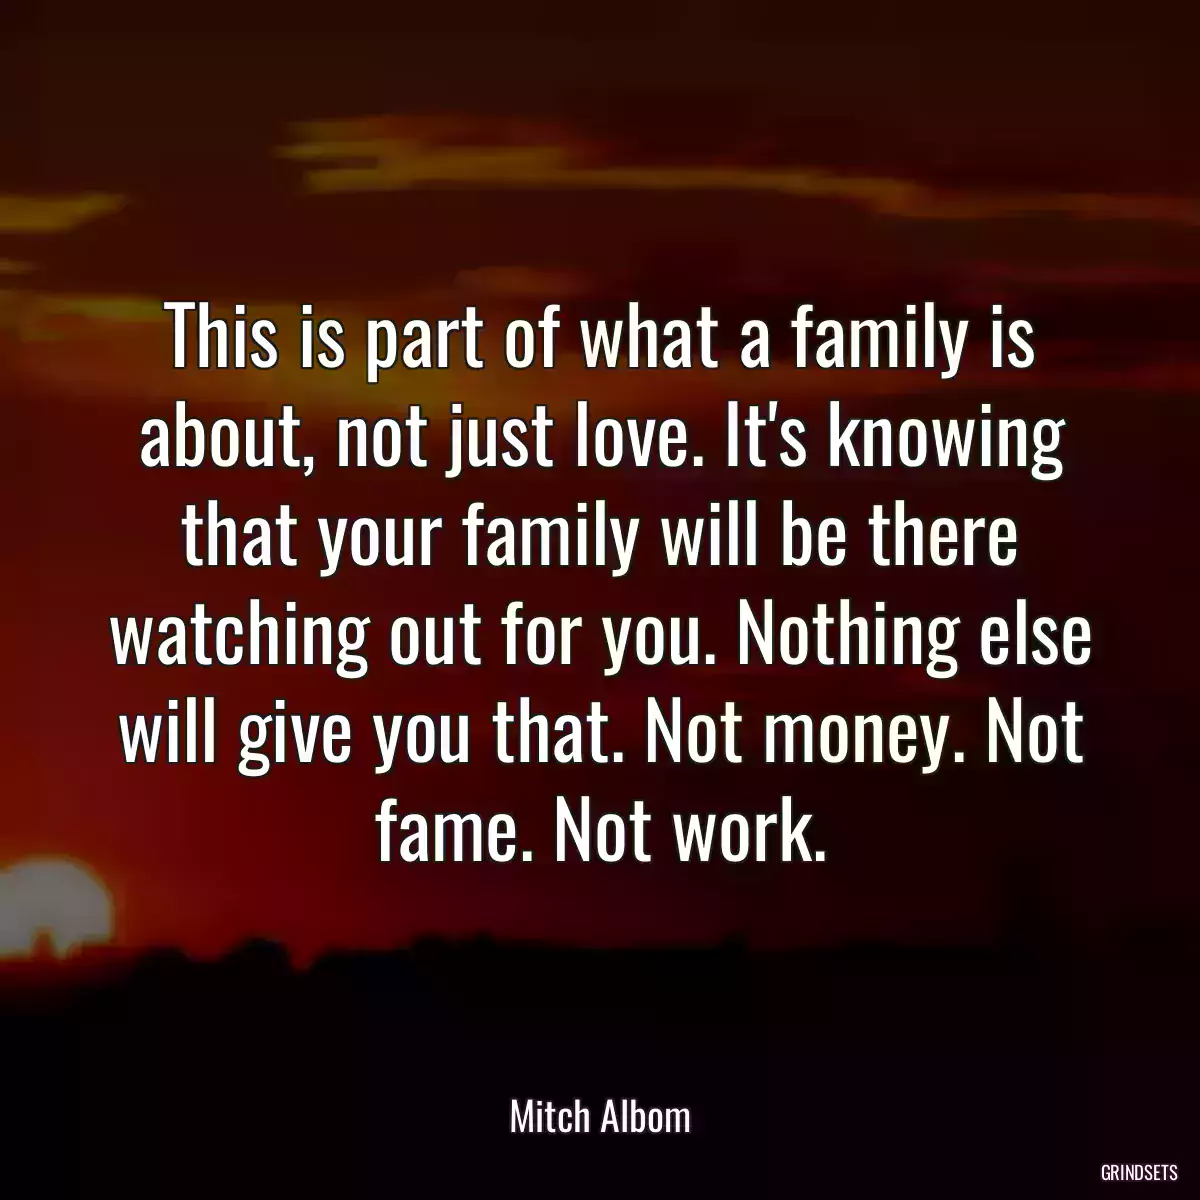 This is part of what a family is about, not just love. It\'s knowing that your family will be there watching out for you. Nothing else will give you that. Not money. Not fame. Not work.